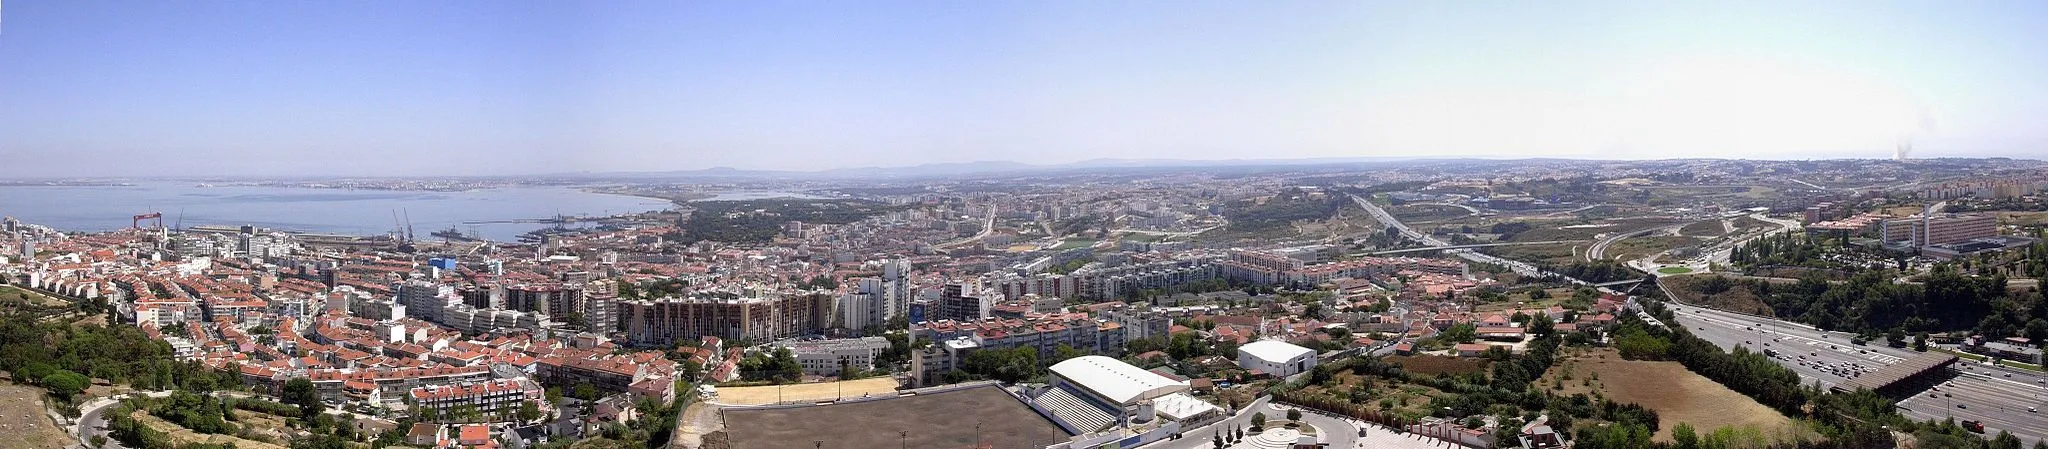 Photo showing: Almada, portugal, view from Cristo Rei